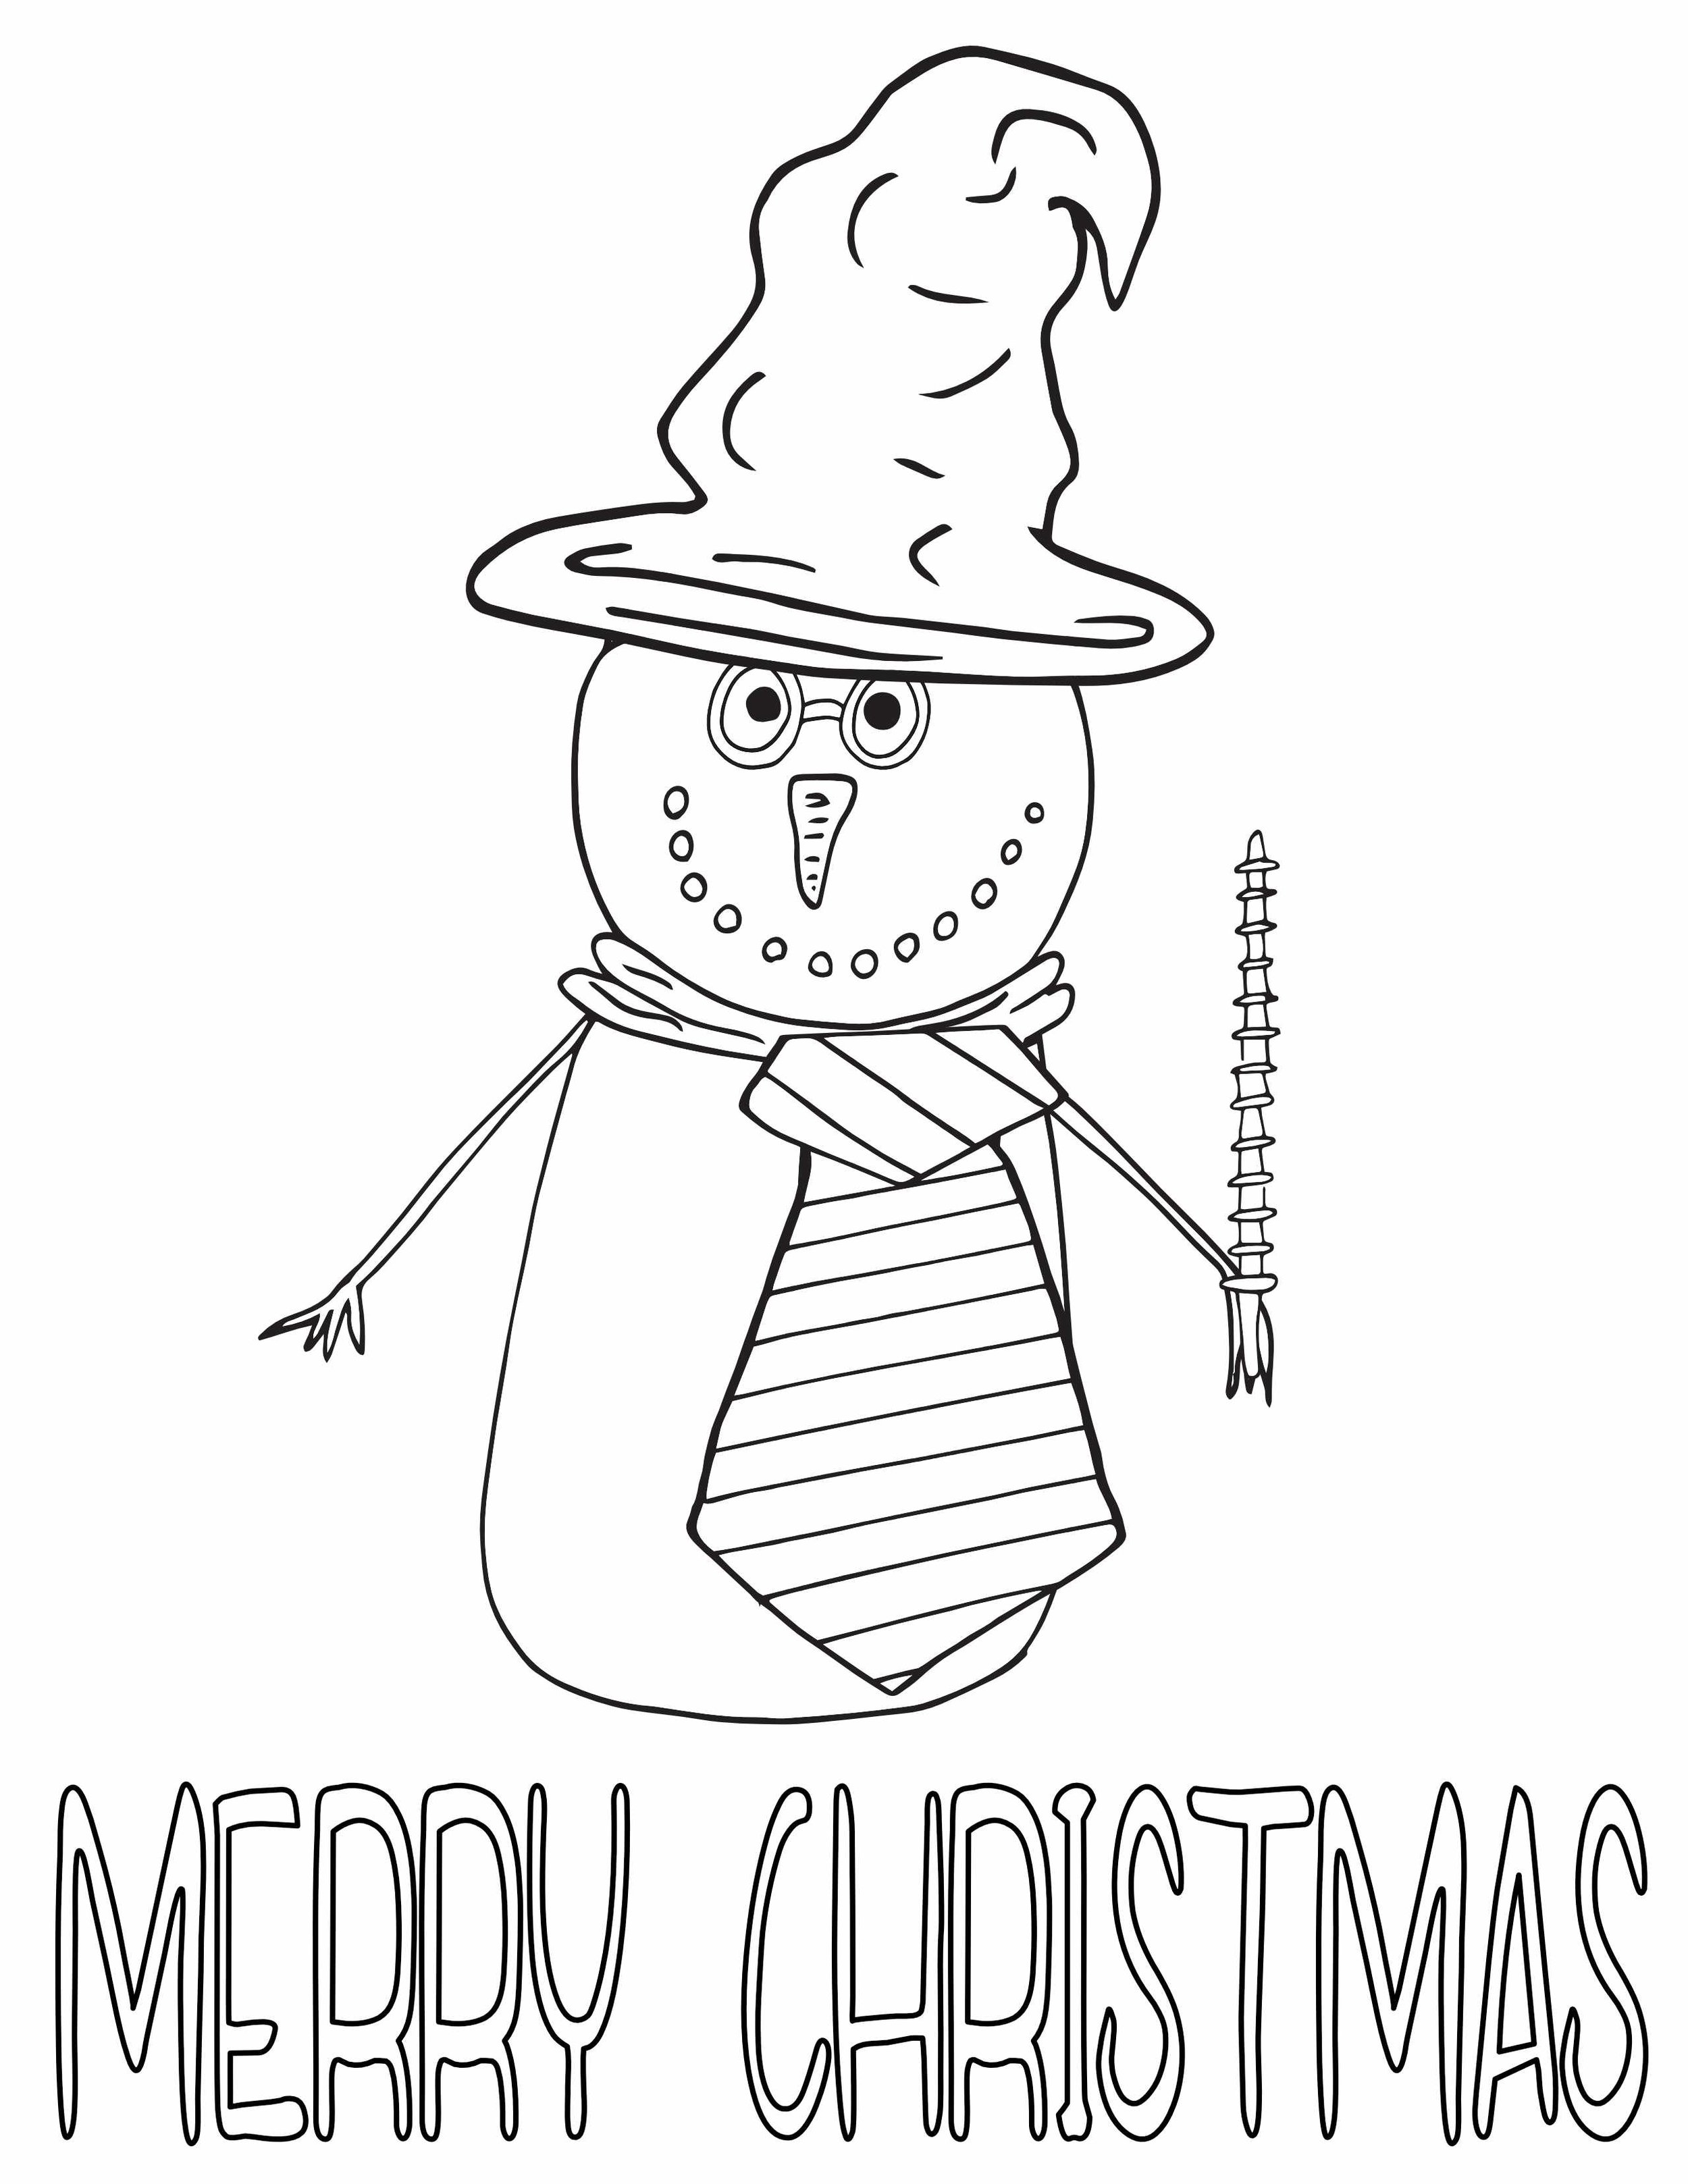 snowman with hogwarts hat, scarf, and wand, colorable text "Merry Christmas"